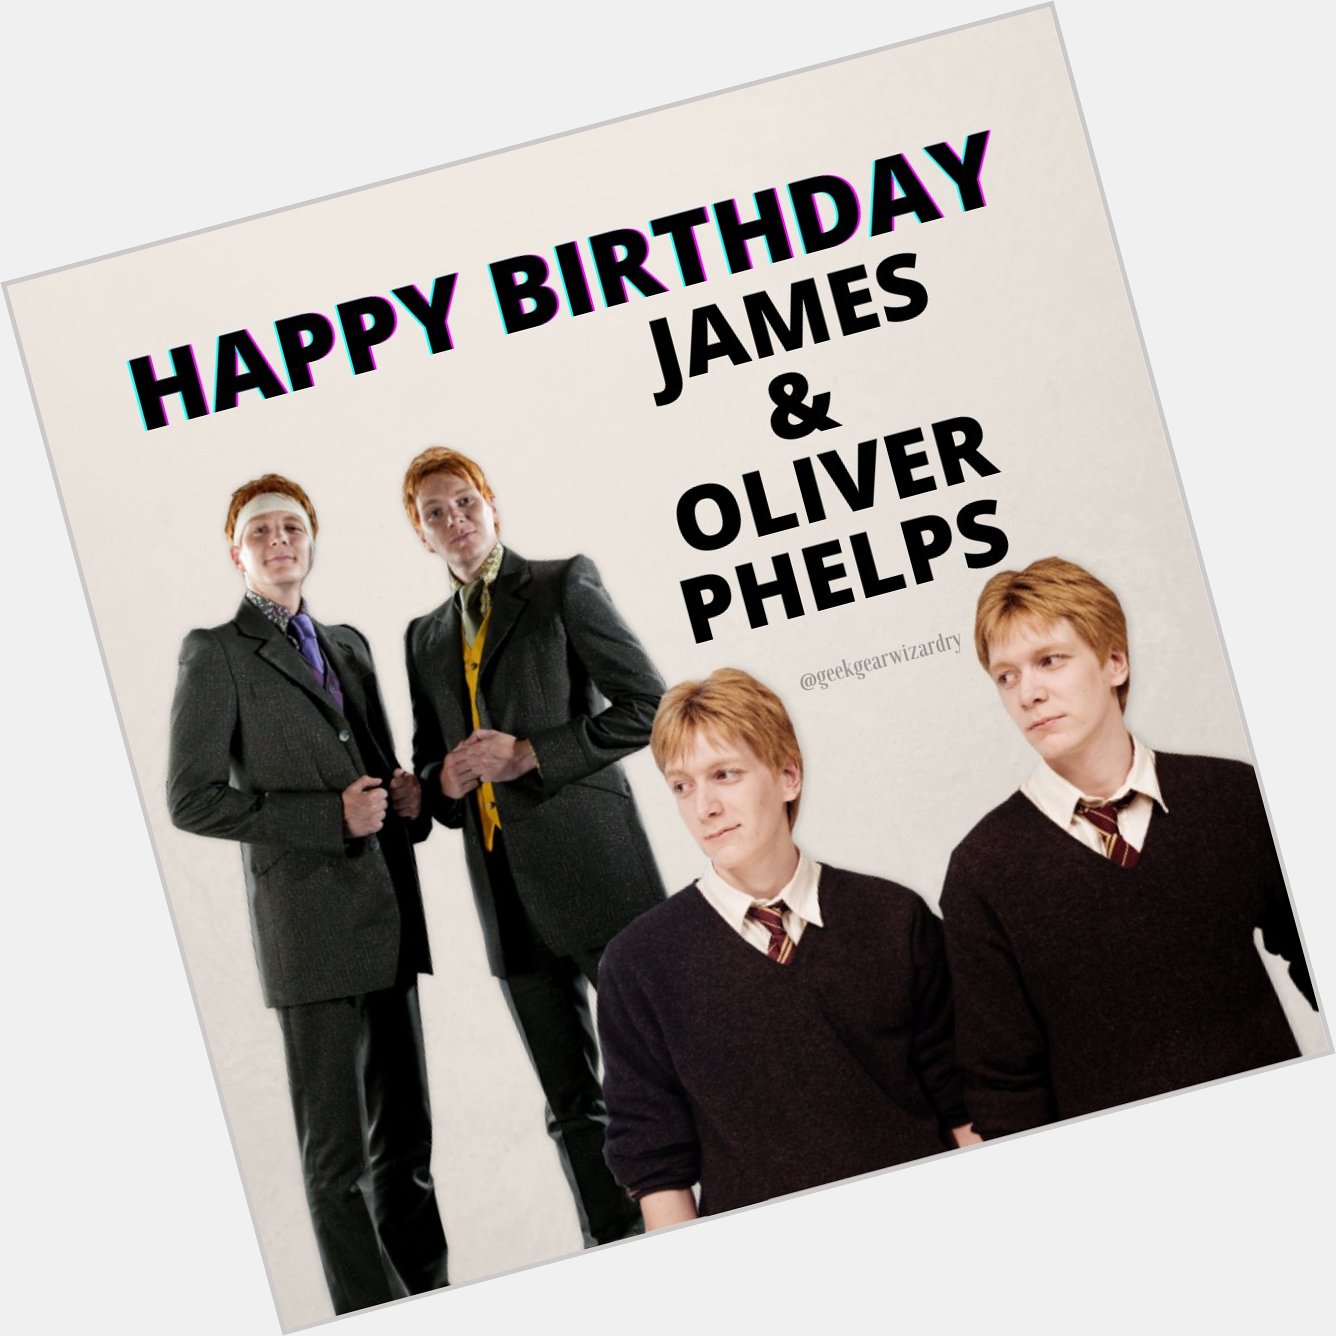 HAPPY BIRTHDAY to James and Oliver Phelps! Thank you for bringing the Weasley twins to our screens!  